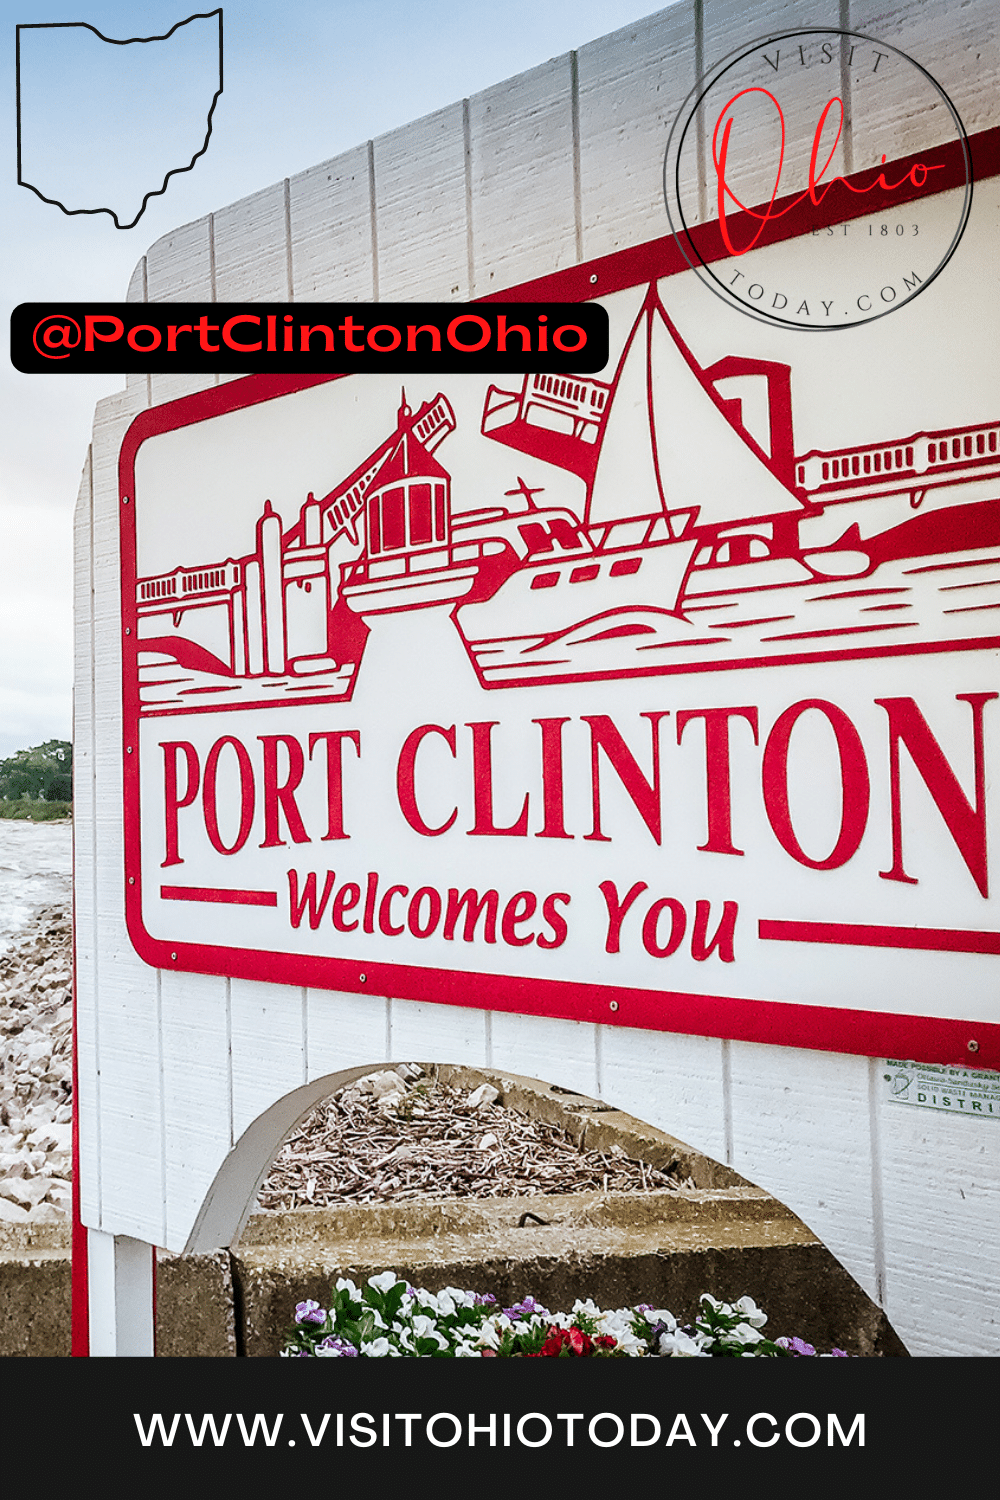 A close up photograph of a sign which says Port Clinton Welcomes You